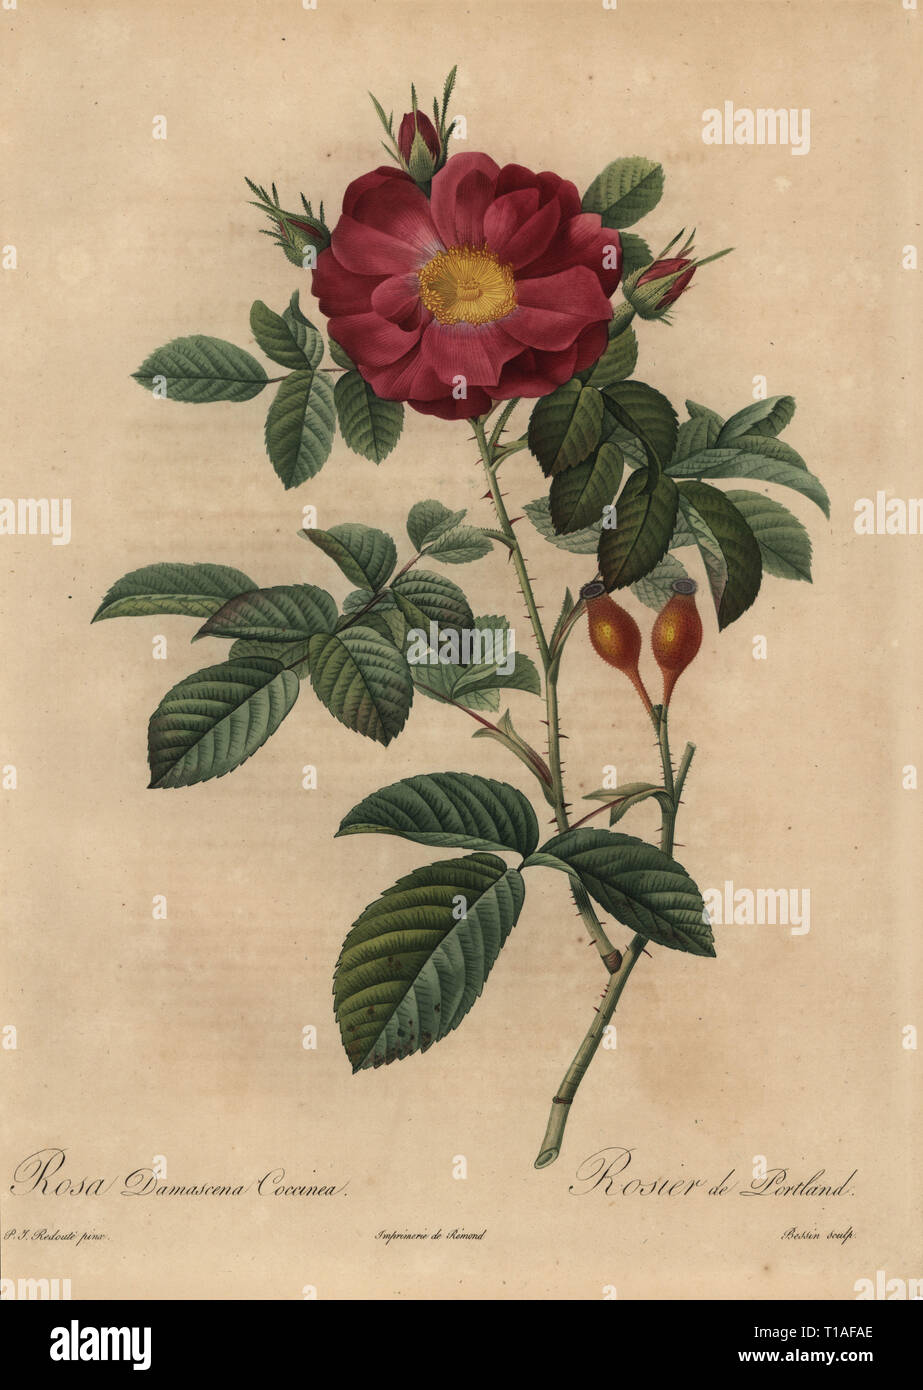 Scarlet damask rose, Rosa damascena coccinea, Rosier de Portland.  Hybrid of Rosa gallica and Rosa moschata. Stipple copperplate engraving by Rosine-Antoinette Bessin handcoloured a la poupee after a botanical illustration by Pierre-Joseph Redoute from the first folio edition of Les Roses, Firmin Didot, Paris, 1817. Stock Photo